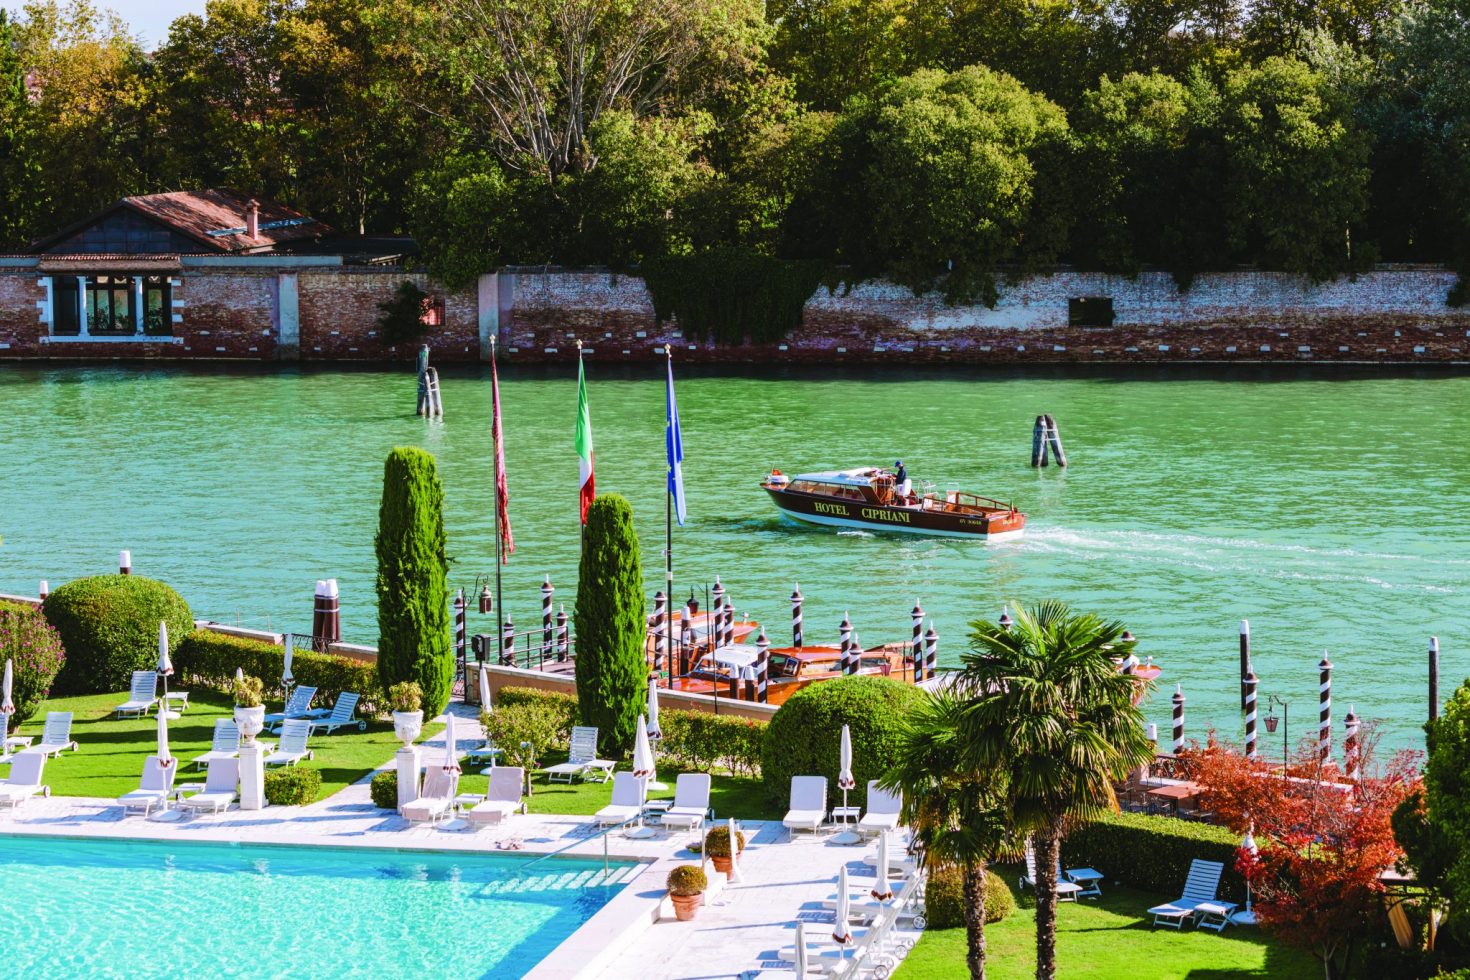 Why Belmond Hotel Cipriani, set on an island in the Venetian